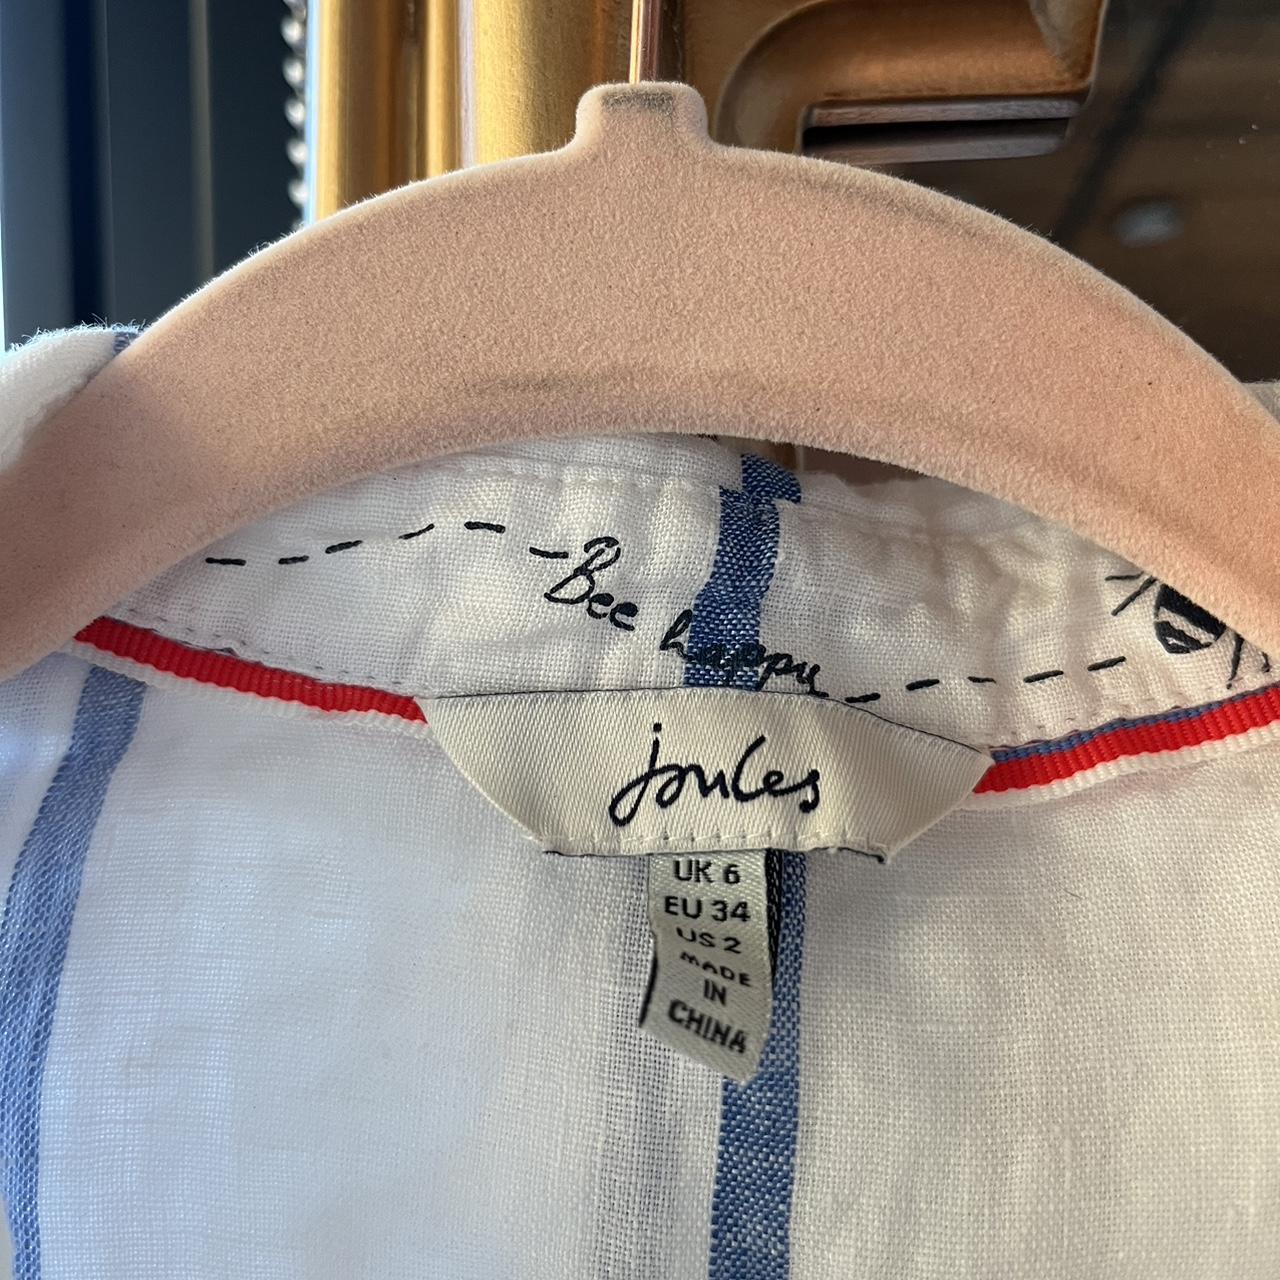 Joules Women's White and Blue Blouse (2)